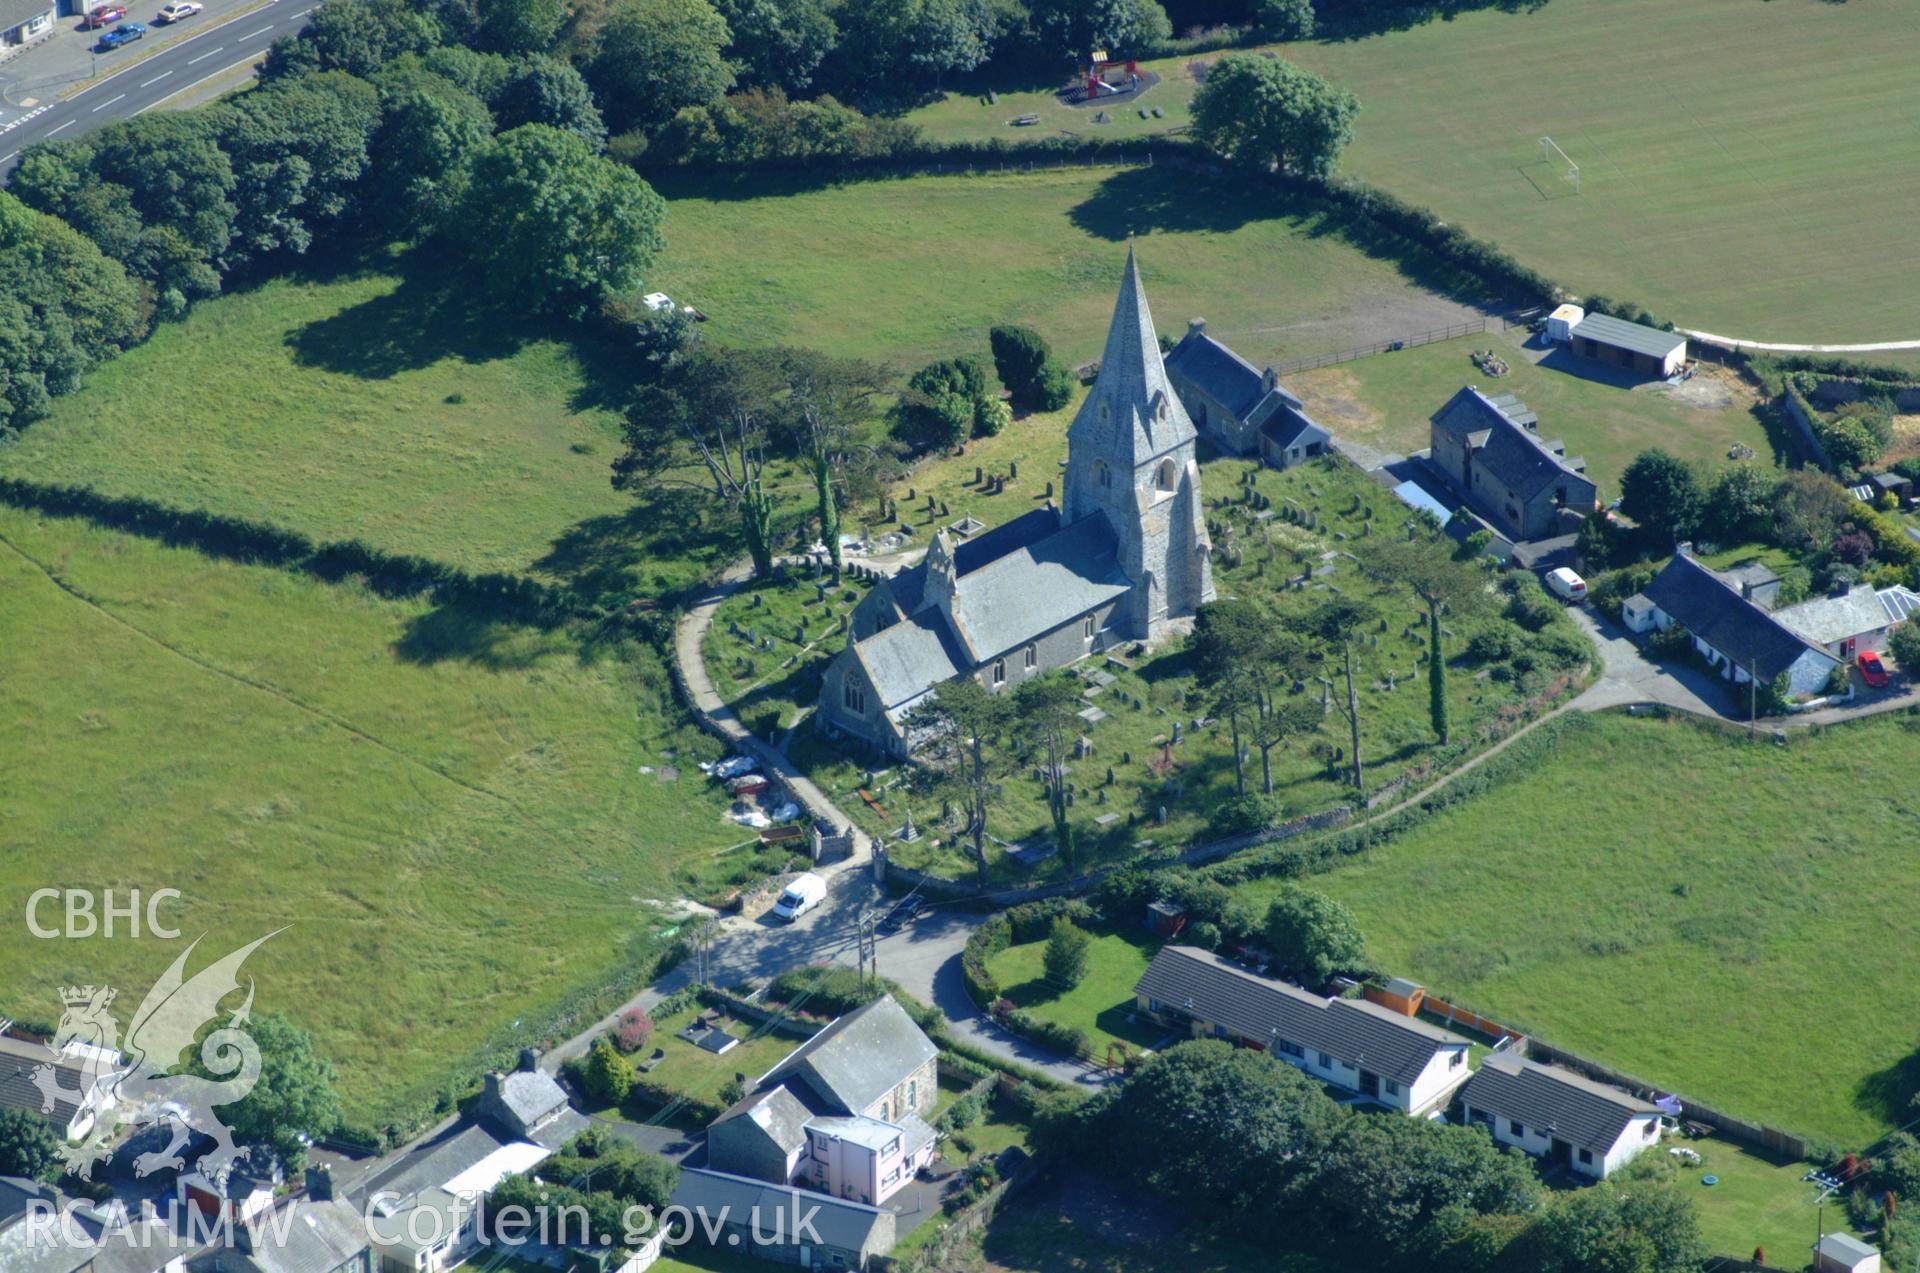 RCAHMW colour oblique aerial photograph of St Rhystud's Church, Llanrhystud taken on 14/06/2004 by Toby Driver